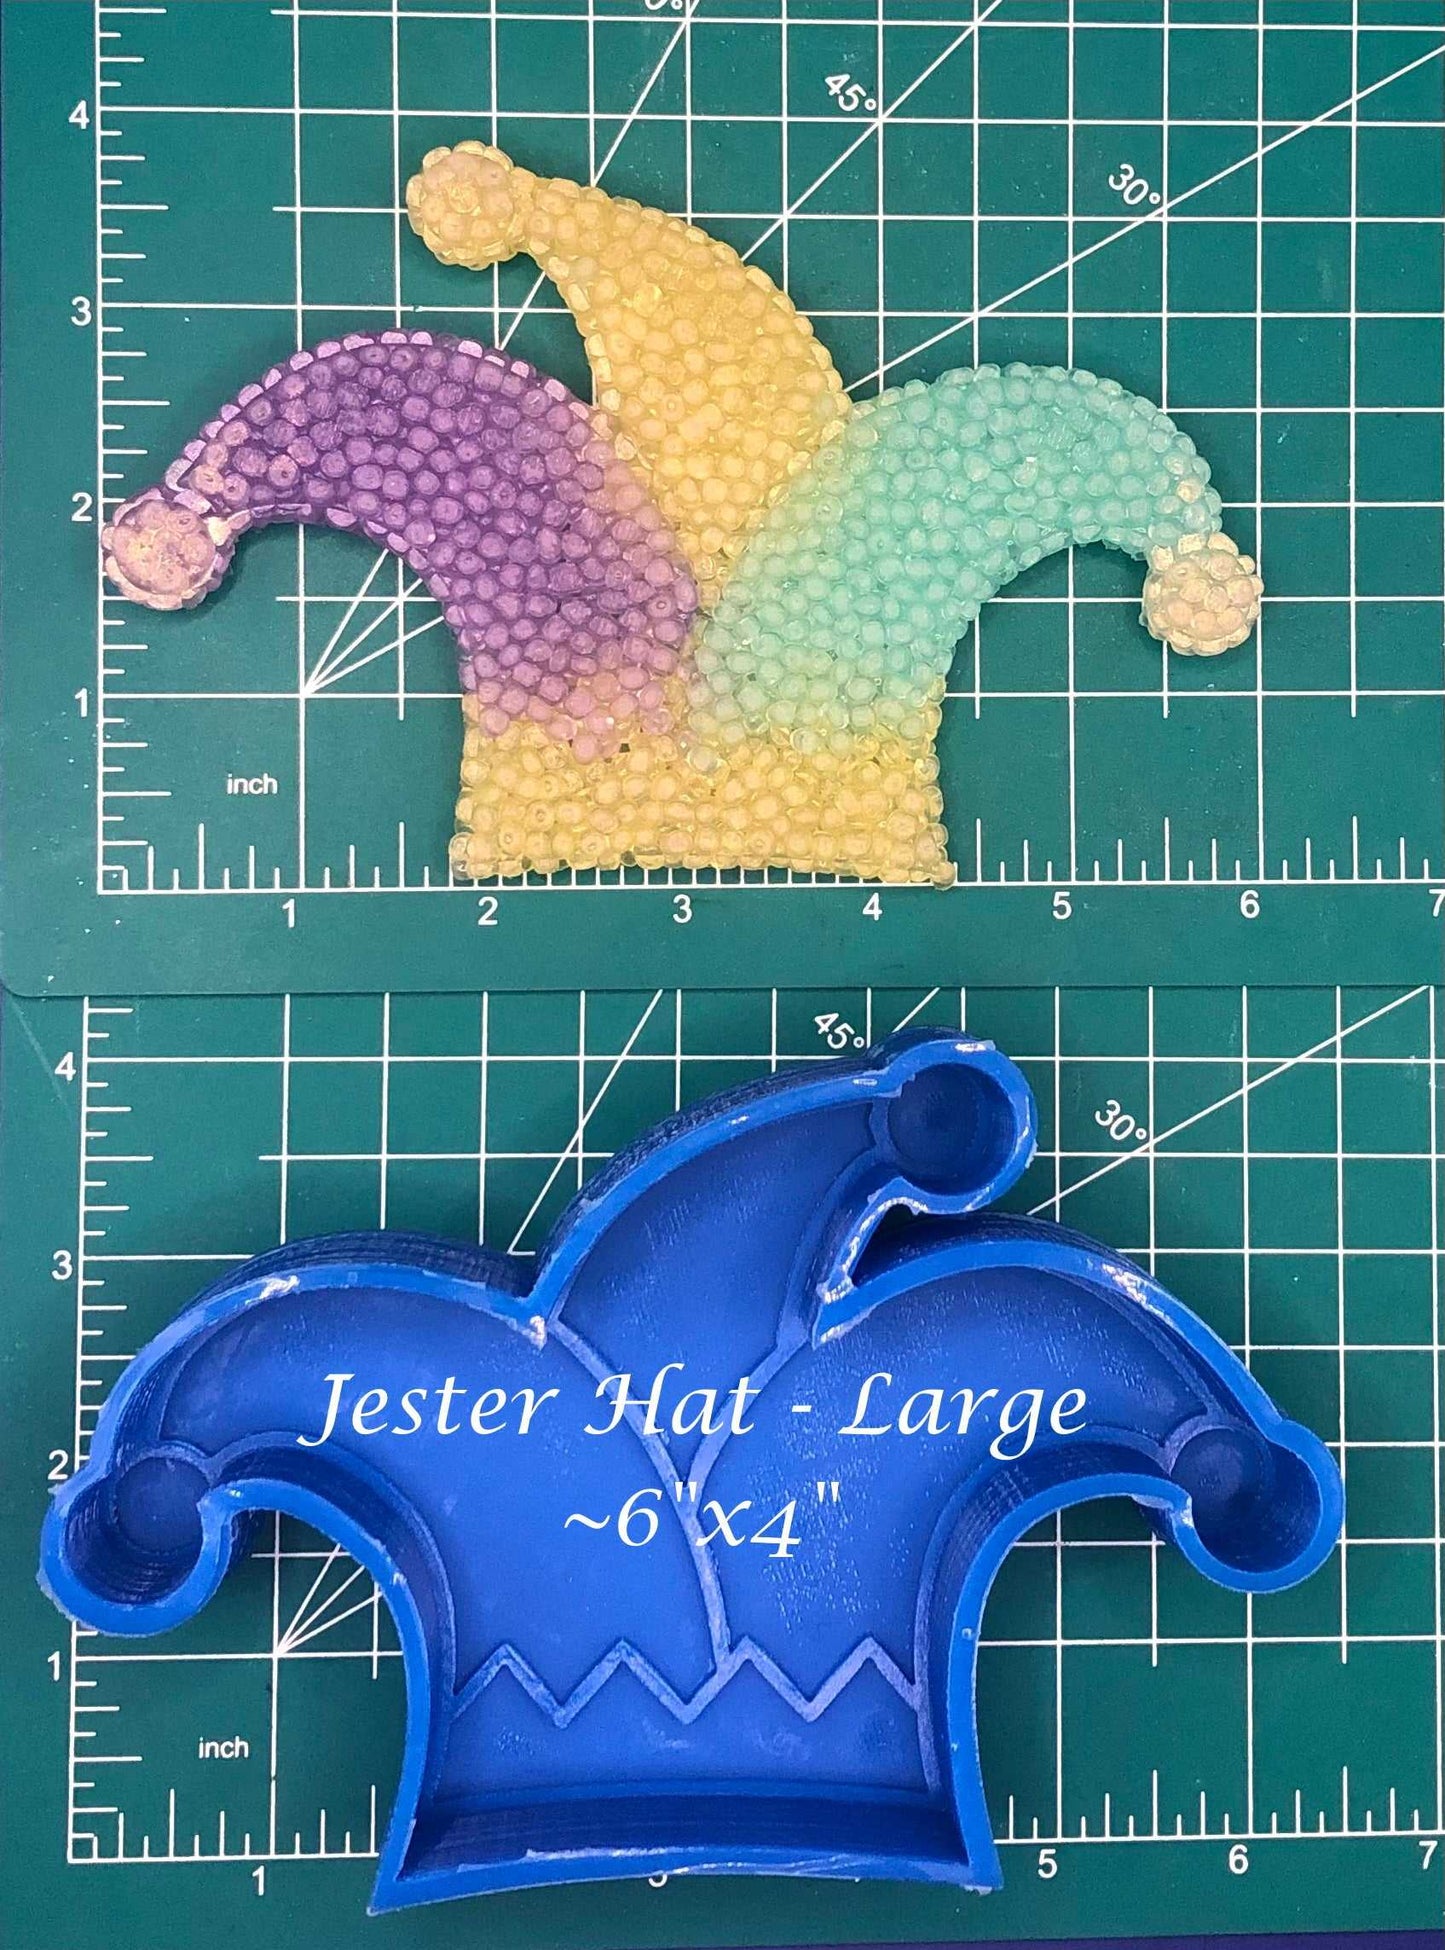 Jester Hat - Silicone Freshie Mold